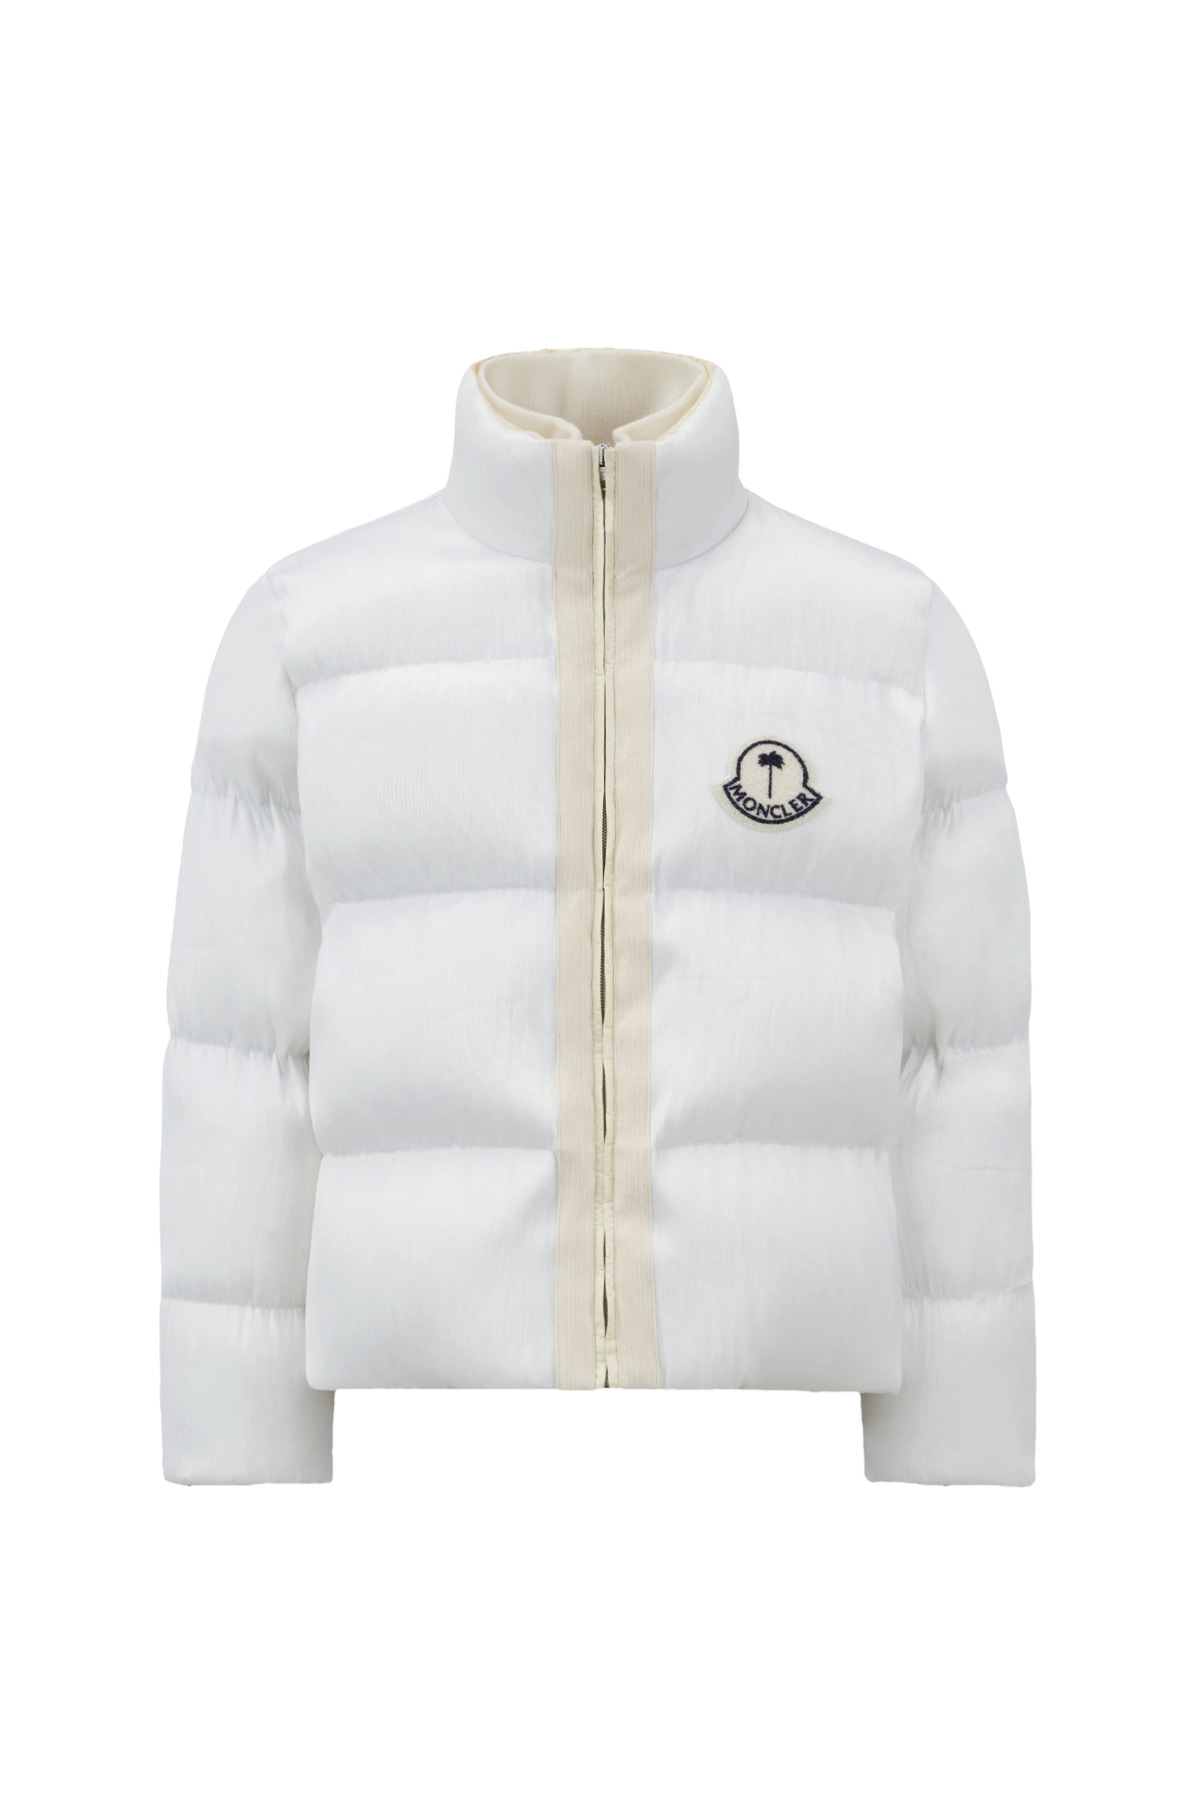 Moncler Maya 70 Collaborations By Palm Angels